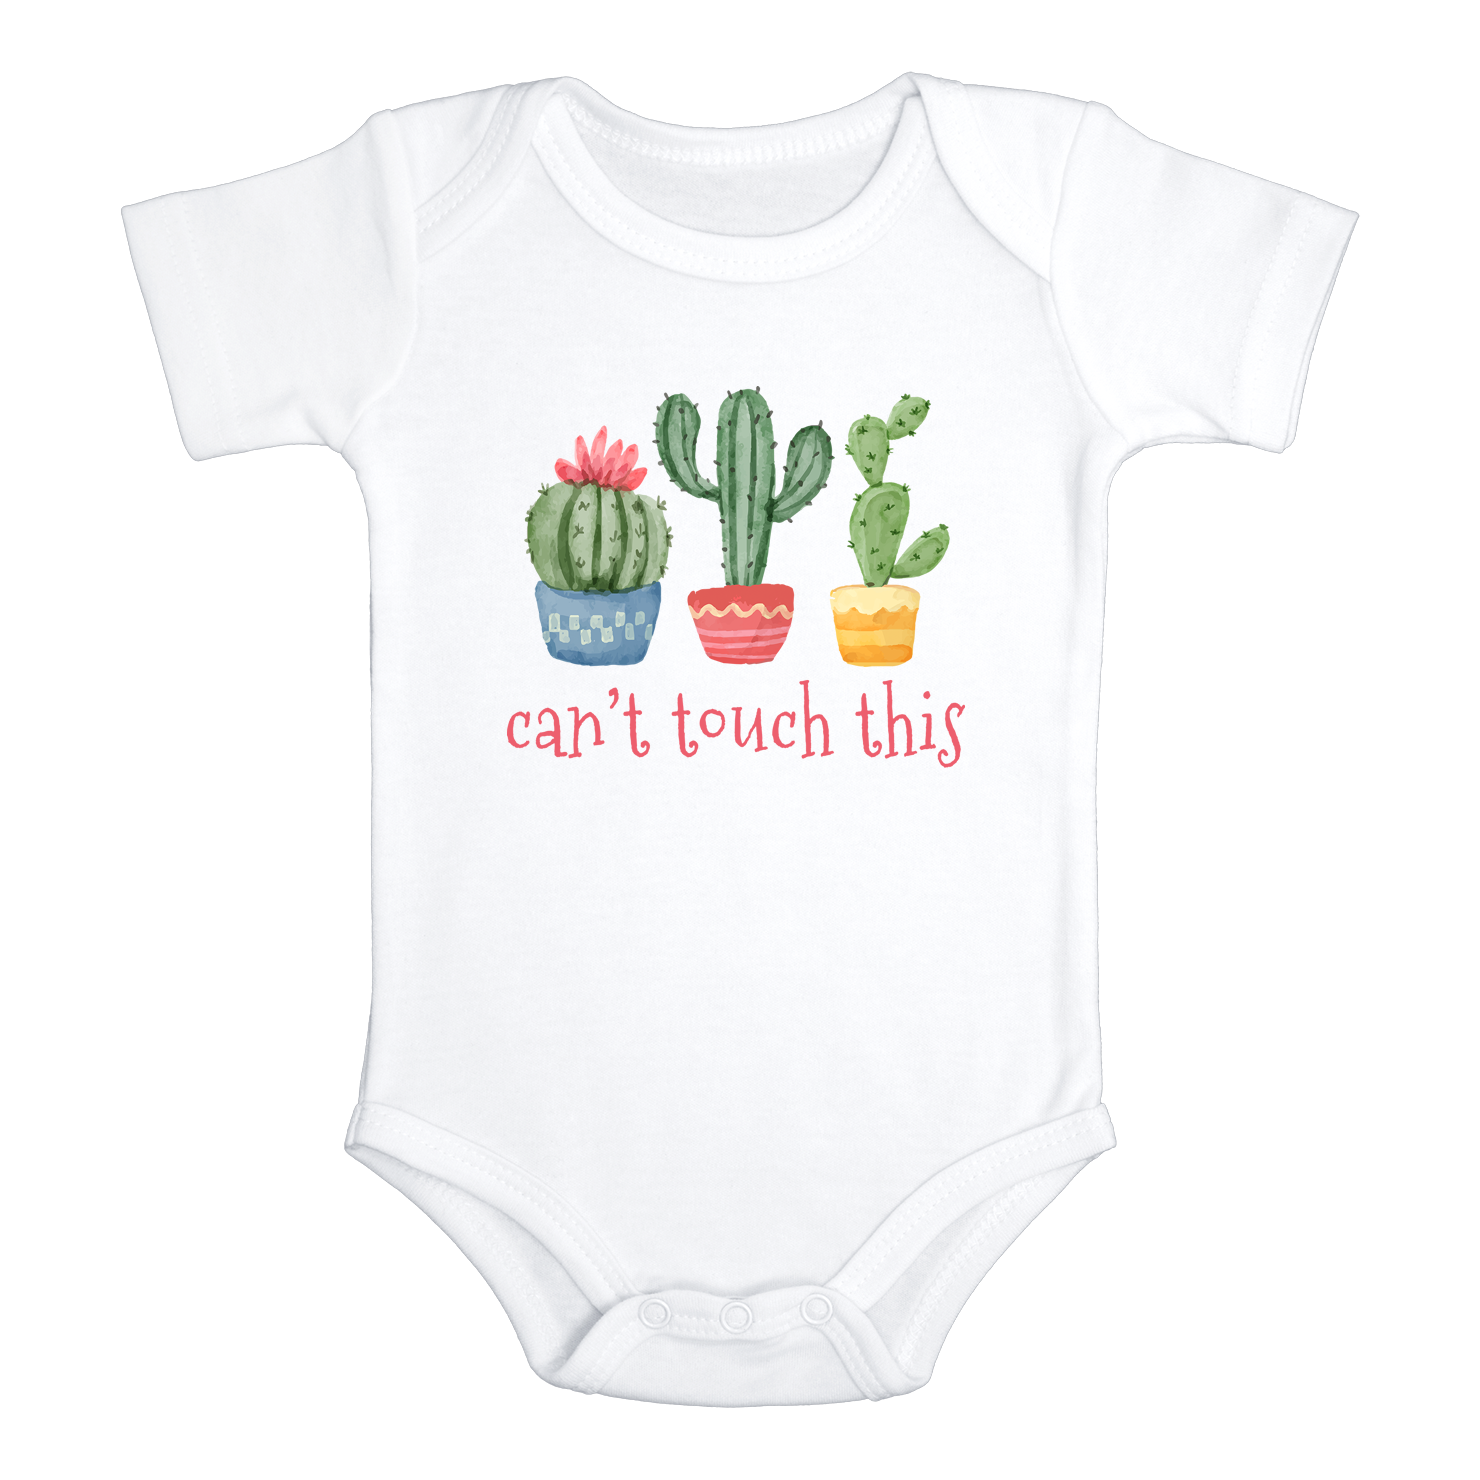 CAN'T TOUCH THIS cactus funny baby onesie bodysuit (white: short or long sleeve) - HappyAddition